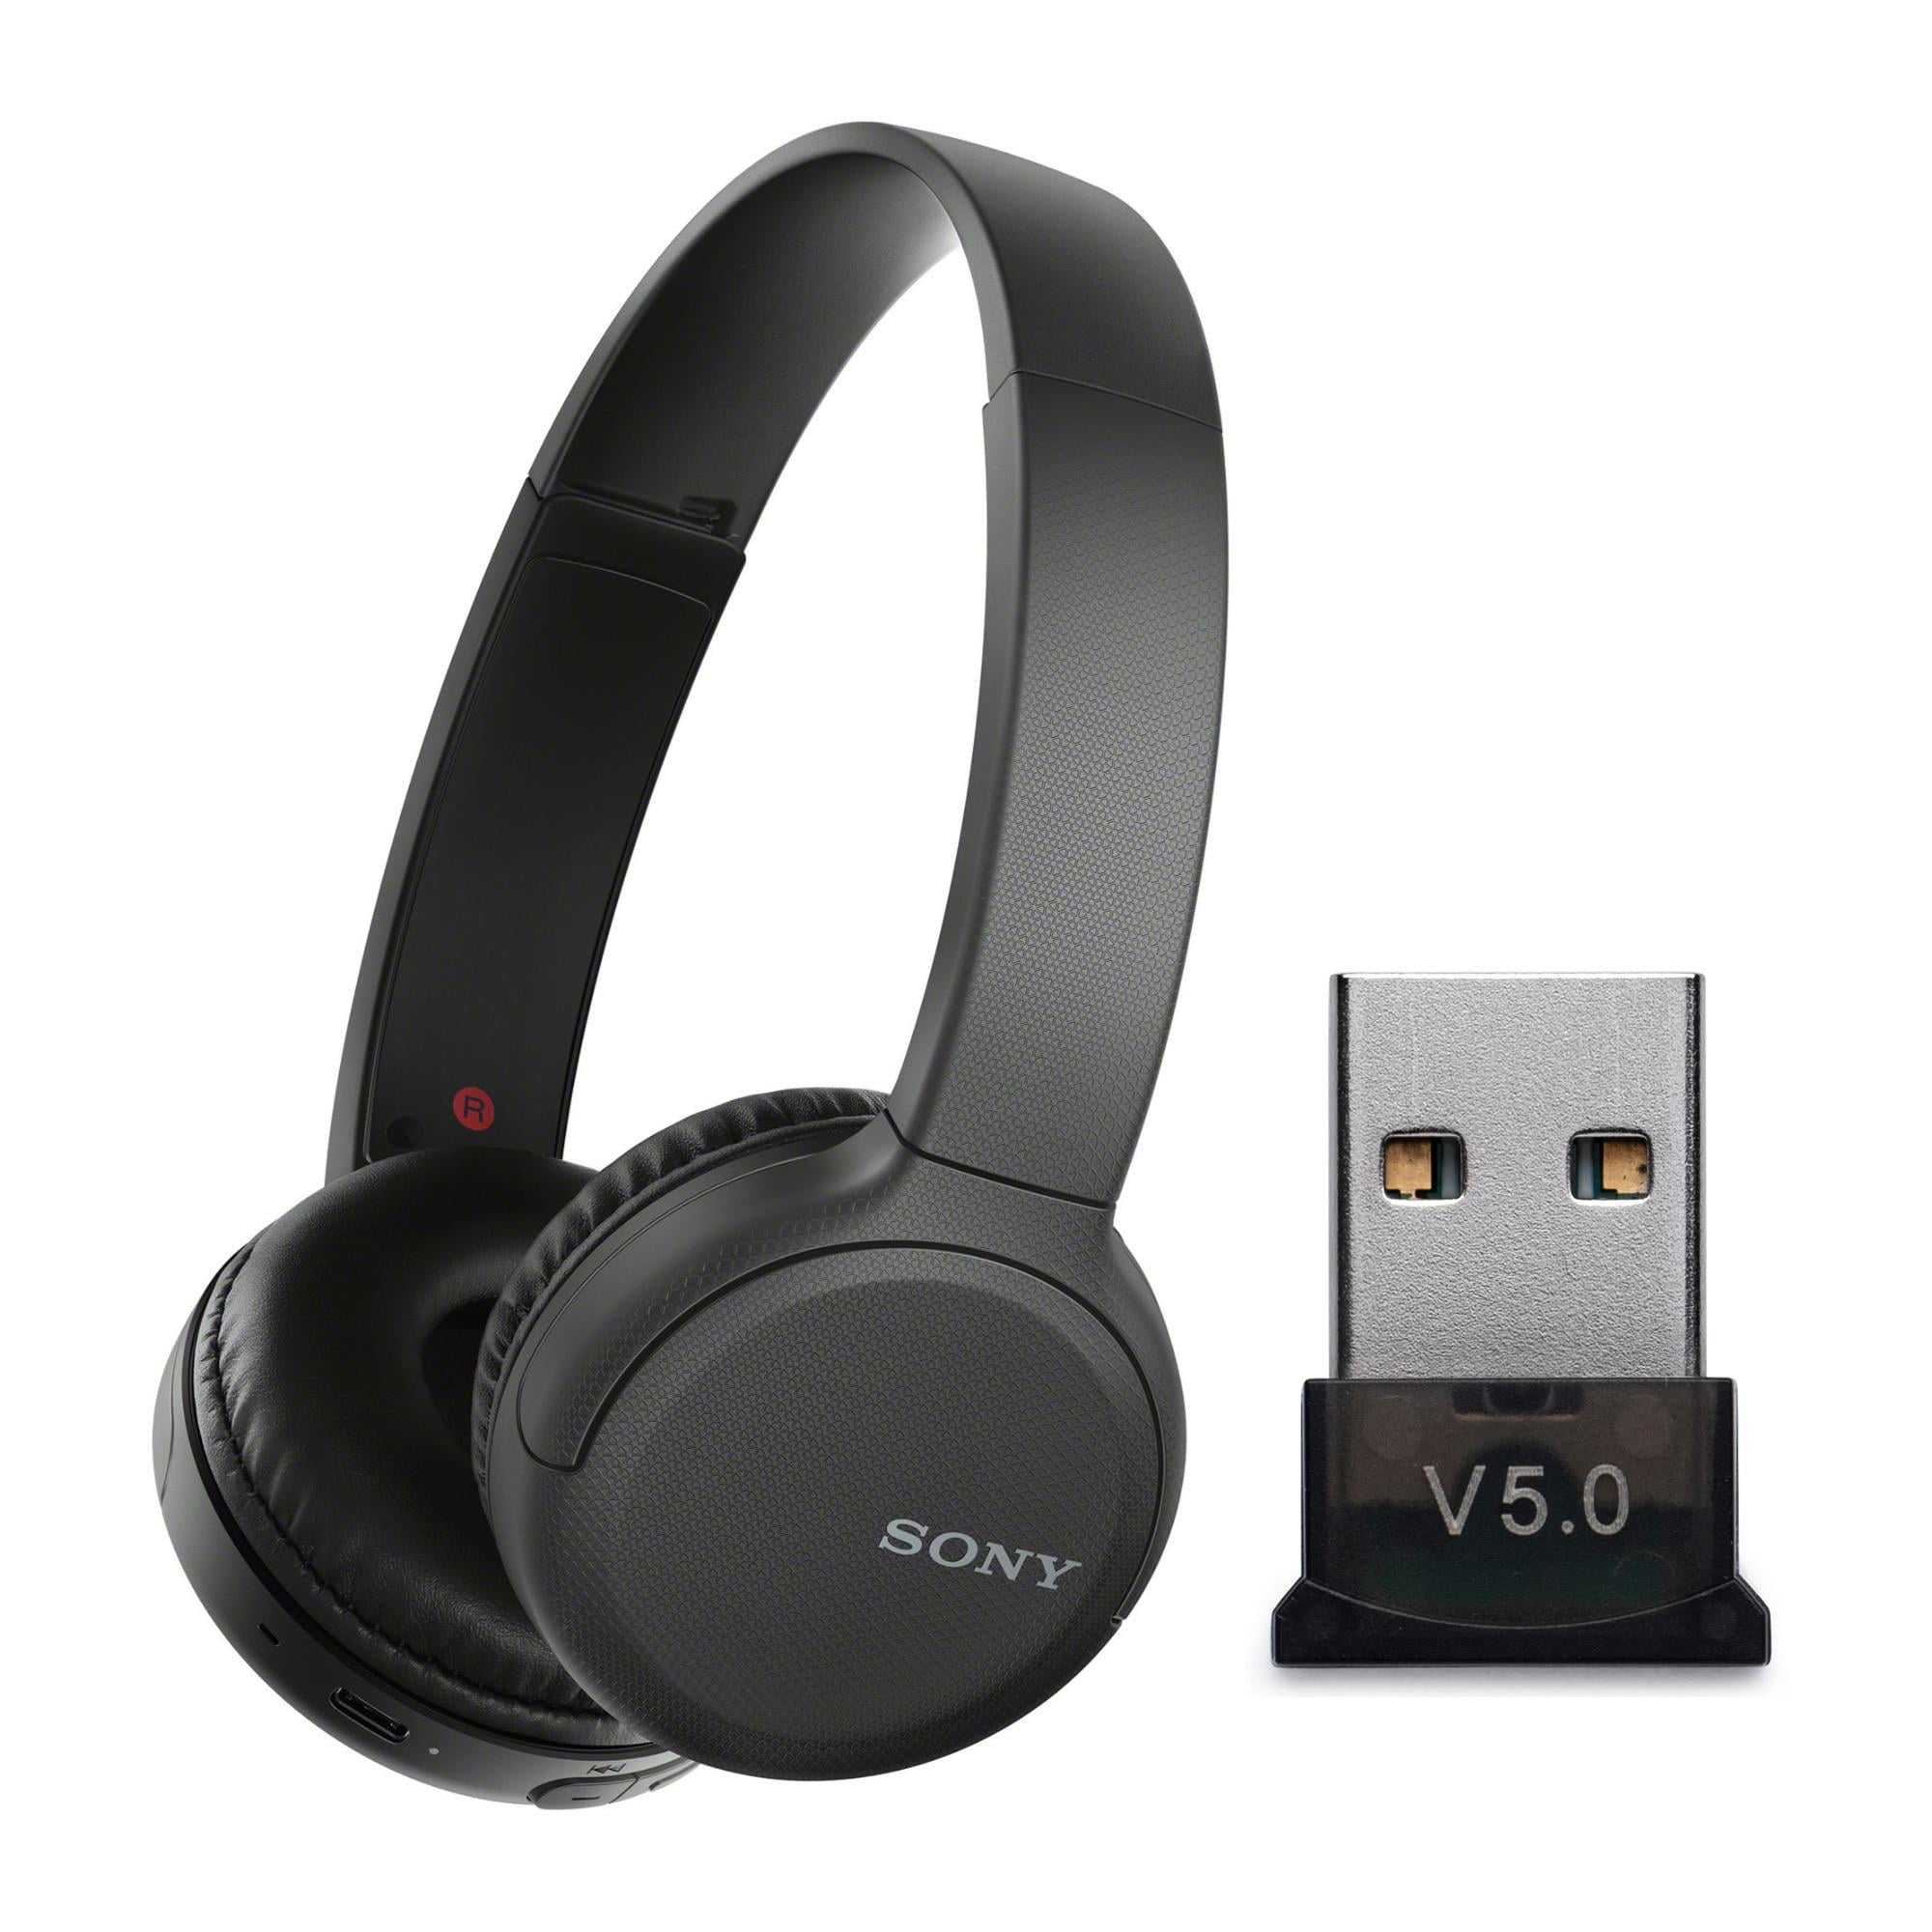 Sony WH-CH510 Wireless Headphones USB Bluetooth Dongle Adapter -